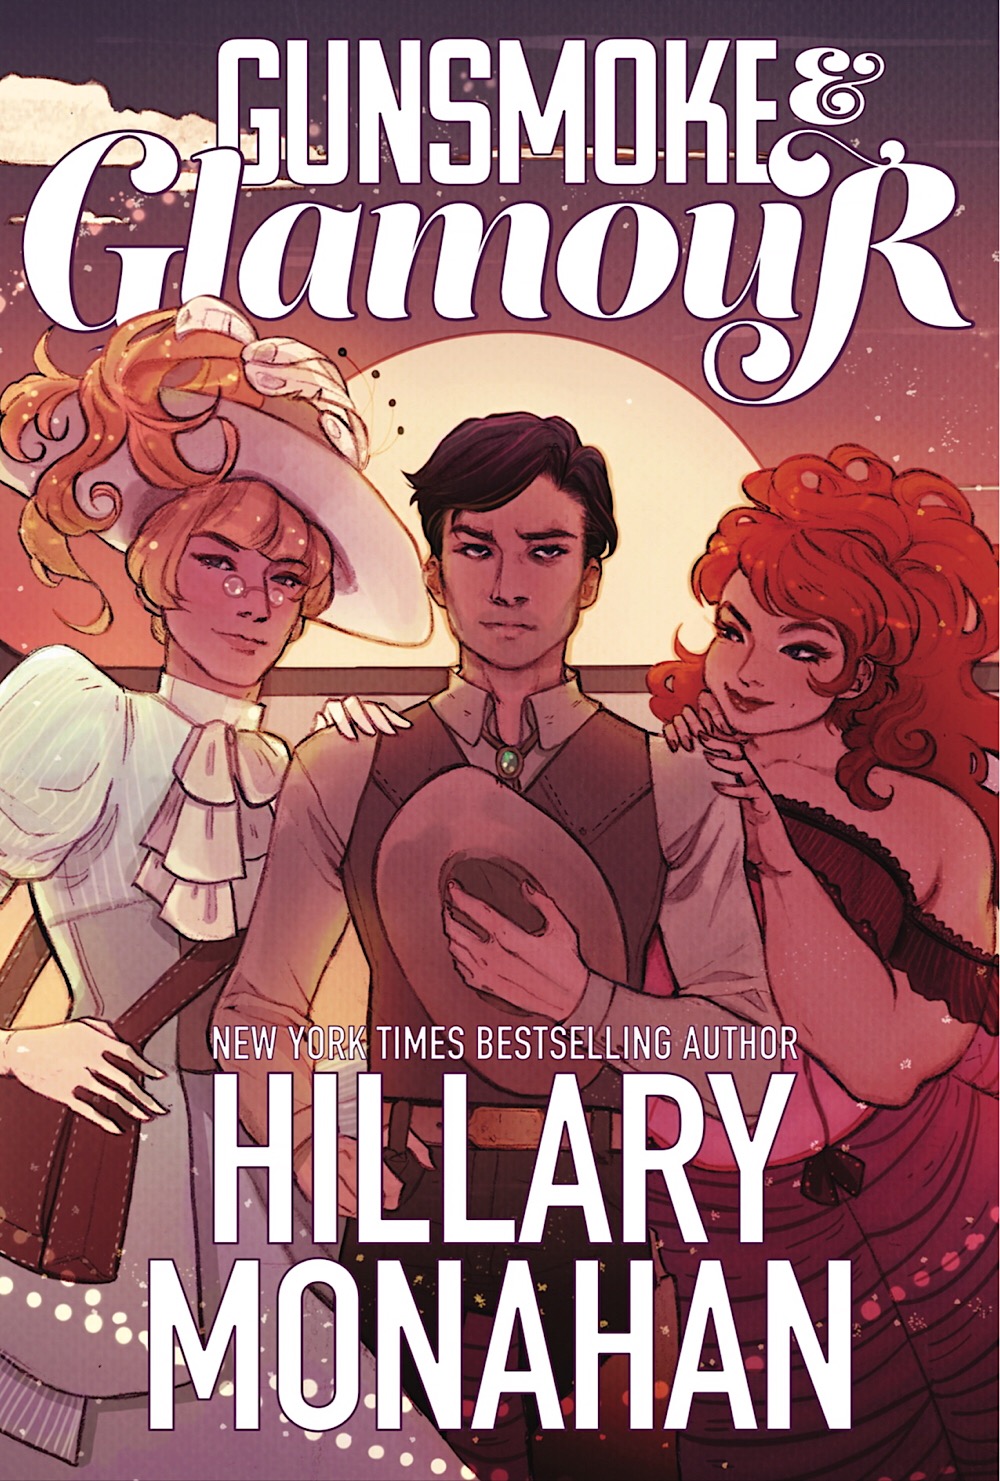 Front cover image for Gunsmoke & Glamour by Hillary Monahan